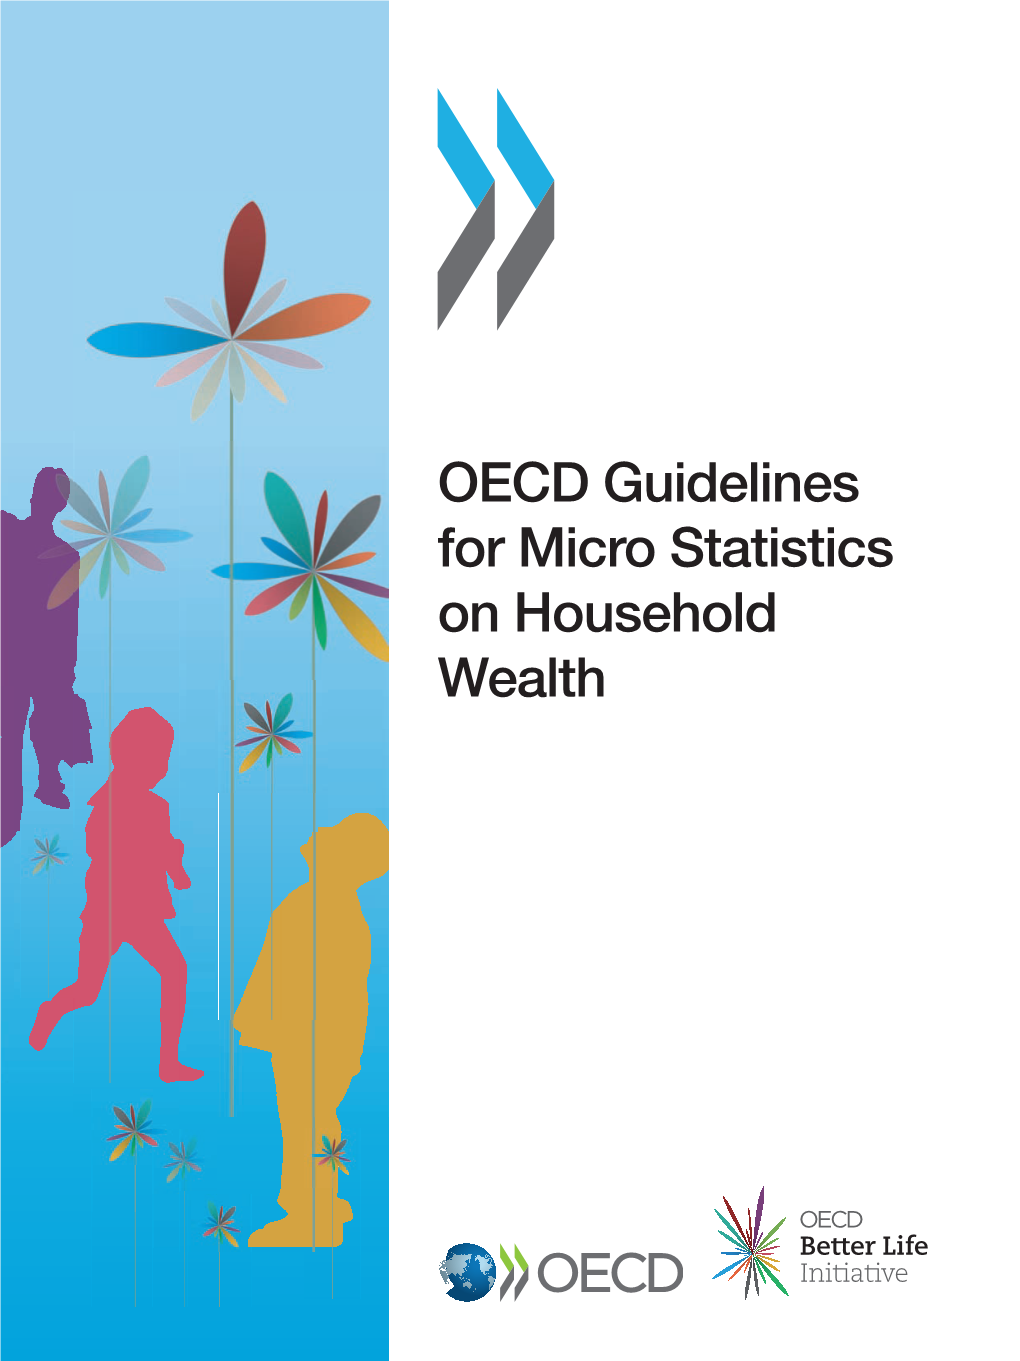 OECD Guidelines for Micro Statistics on Household Wealth